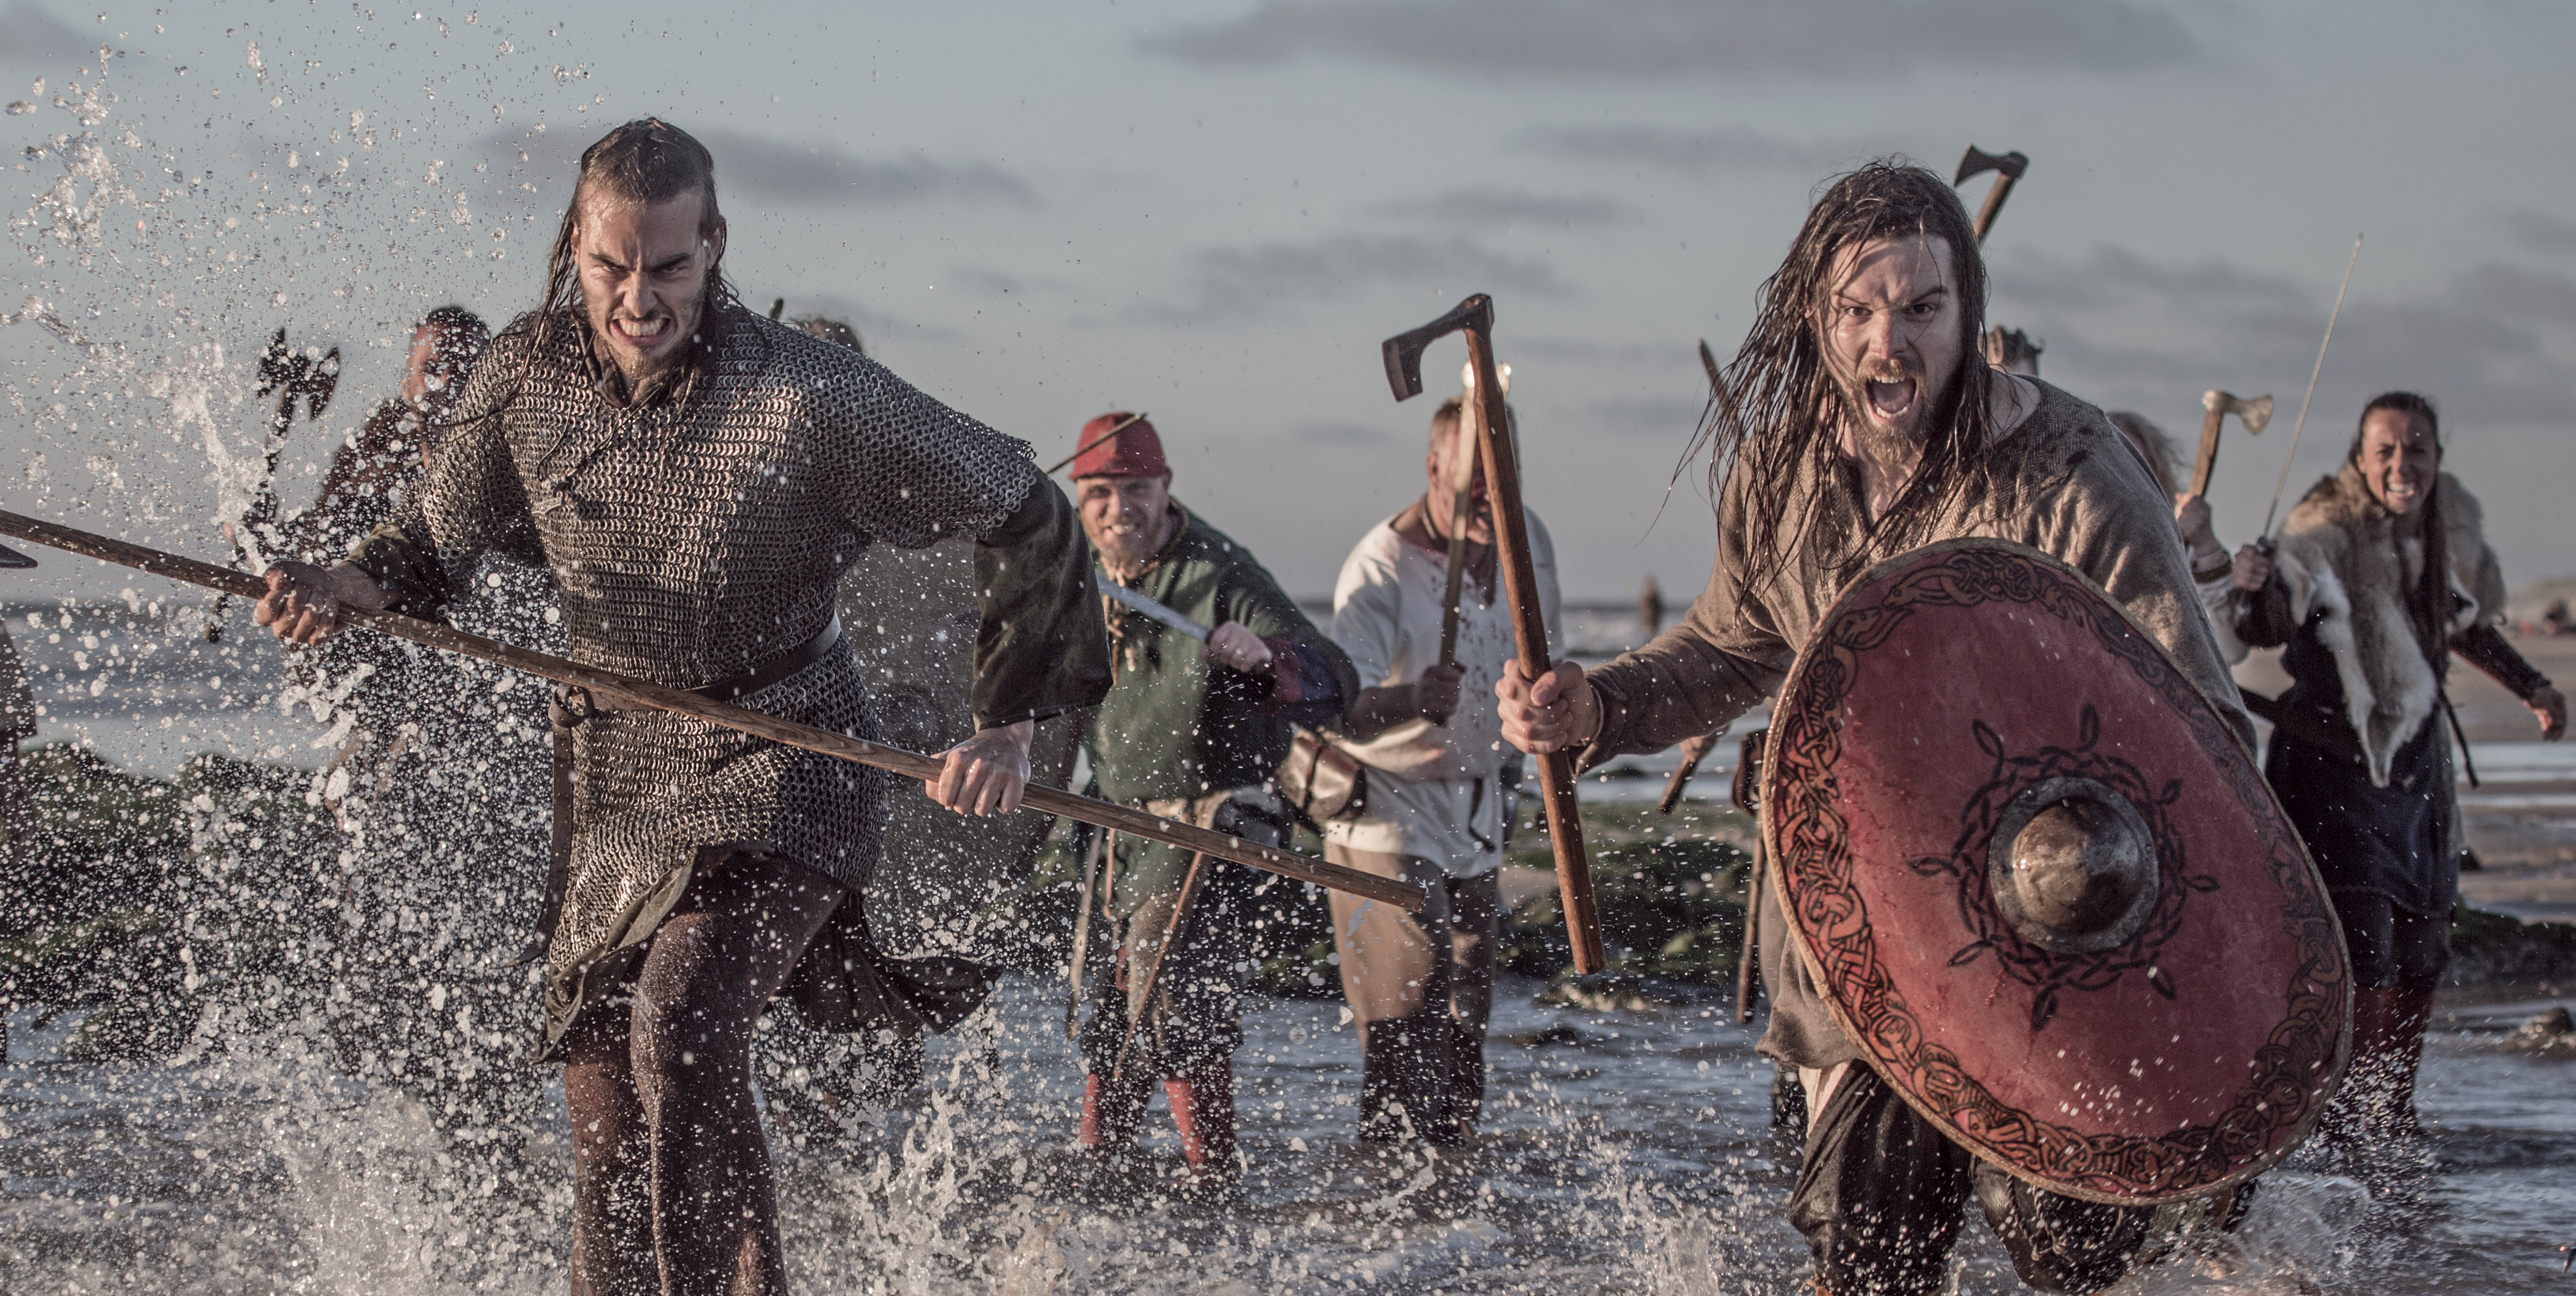 A group of Viking warriors wielding weapons in a battlefield scene at sea. | Source: Getty Images